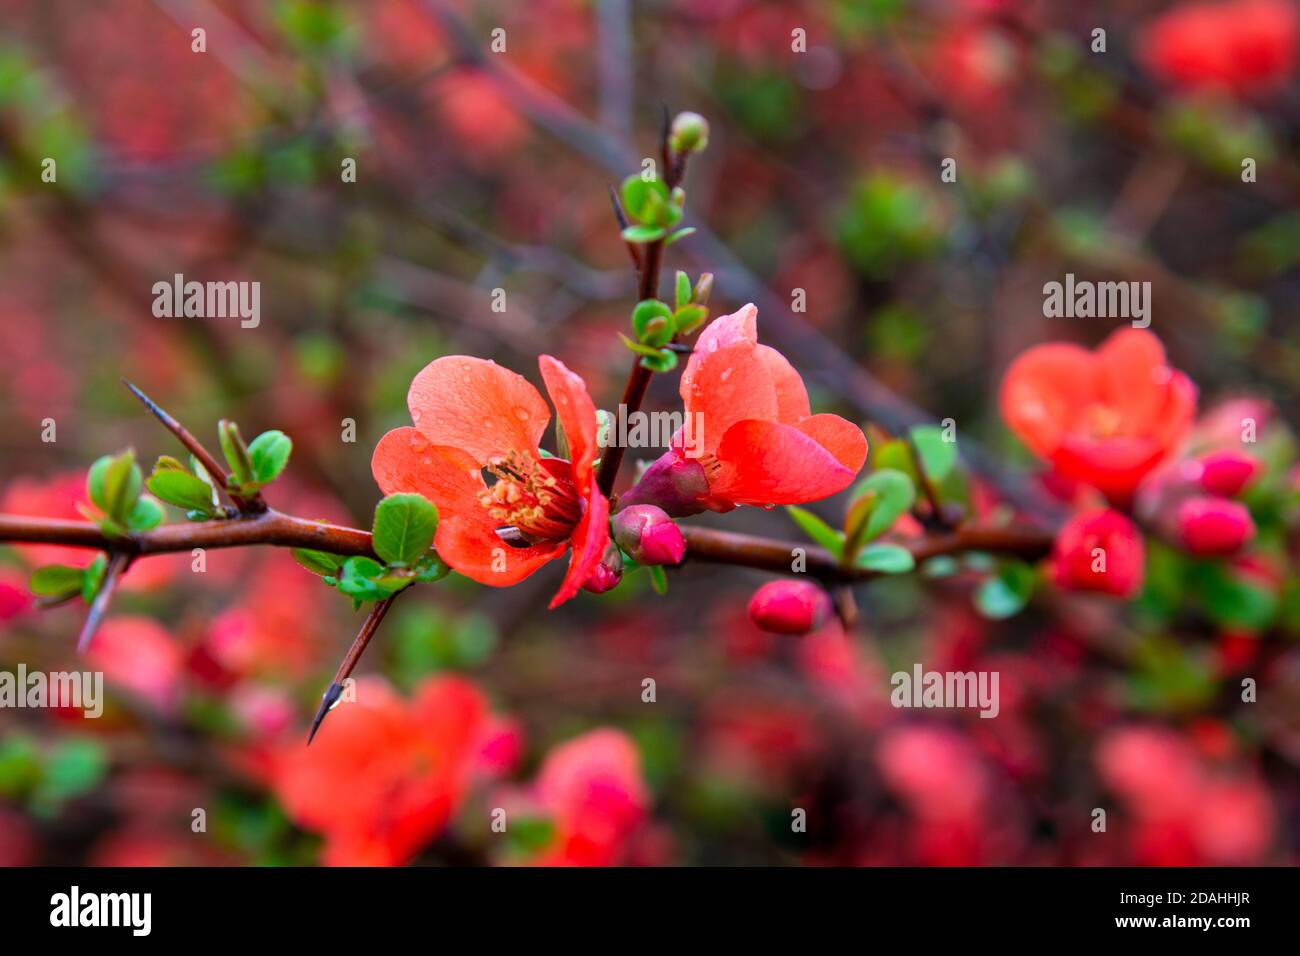 Japanese quince Chaenomeles Japonica blooming. Red flowers on the branch of a Bush under the water droplets. Spring, the birth of life. Stock Photo